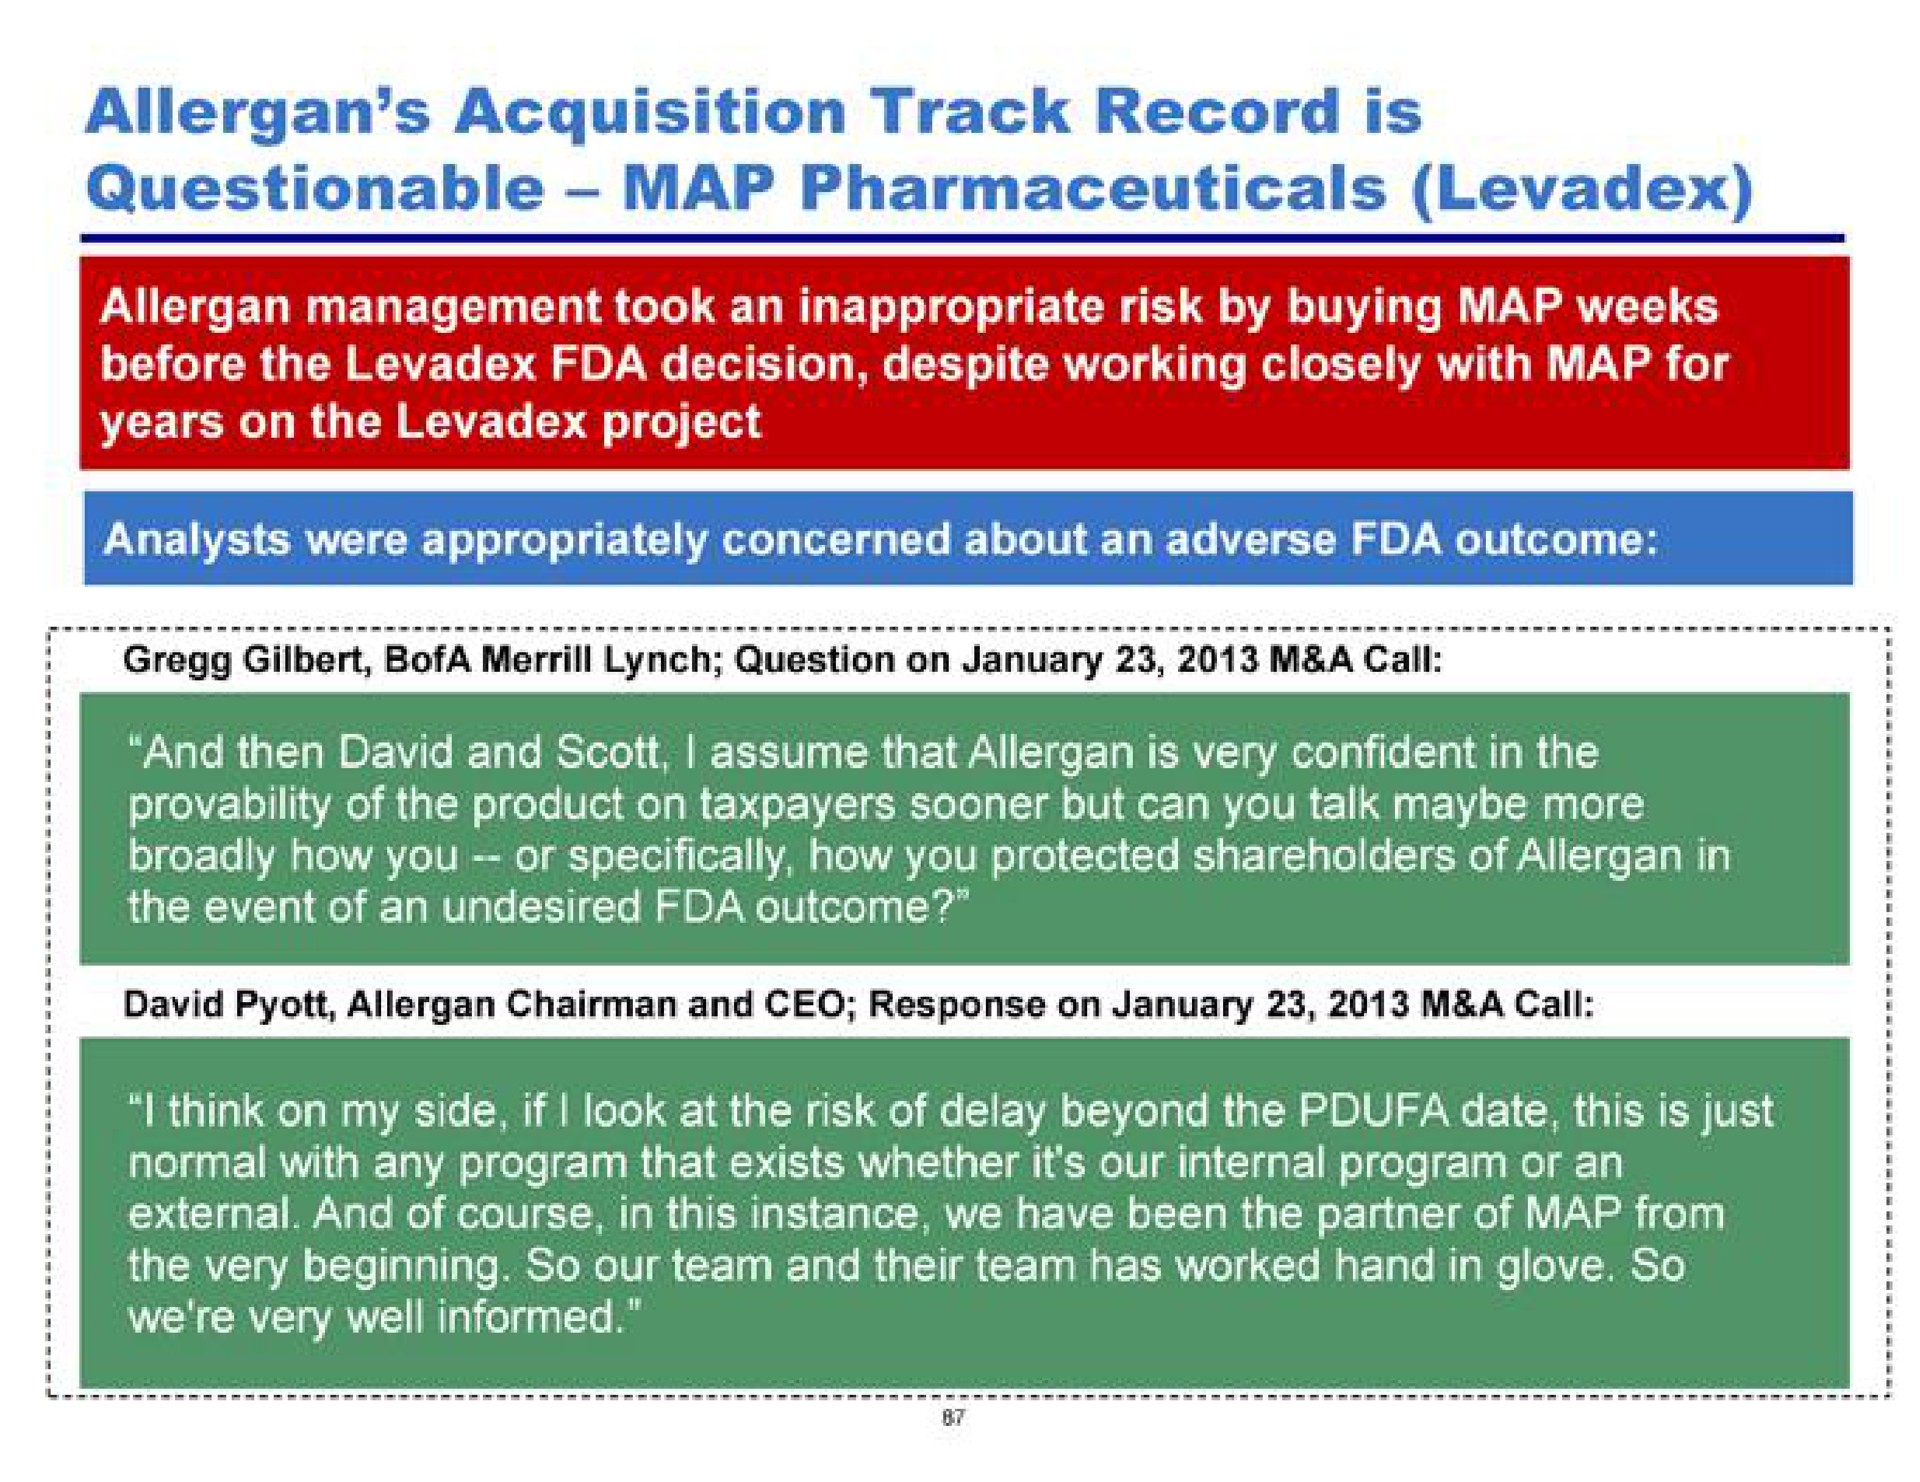 acquisition track record is questionable map pharmaceuticals gilbert lynch question on | Pershing Square